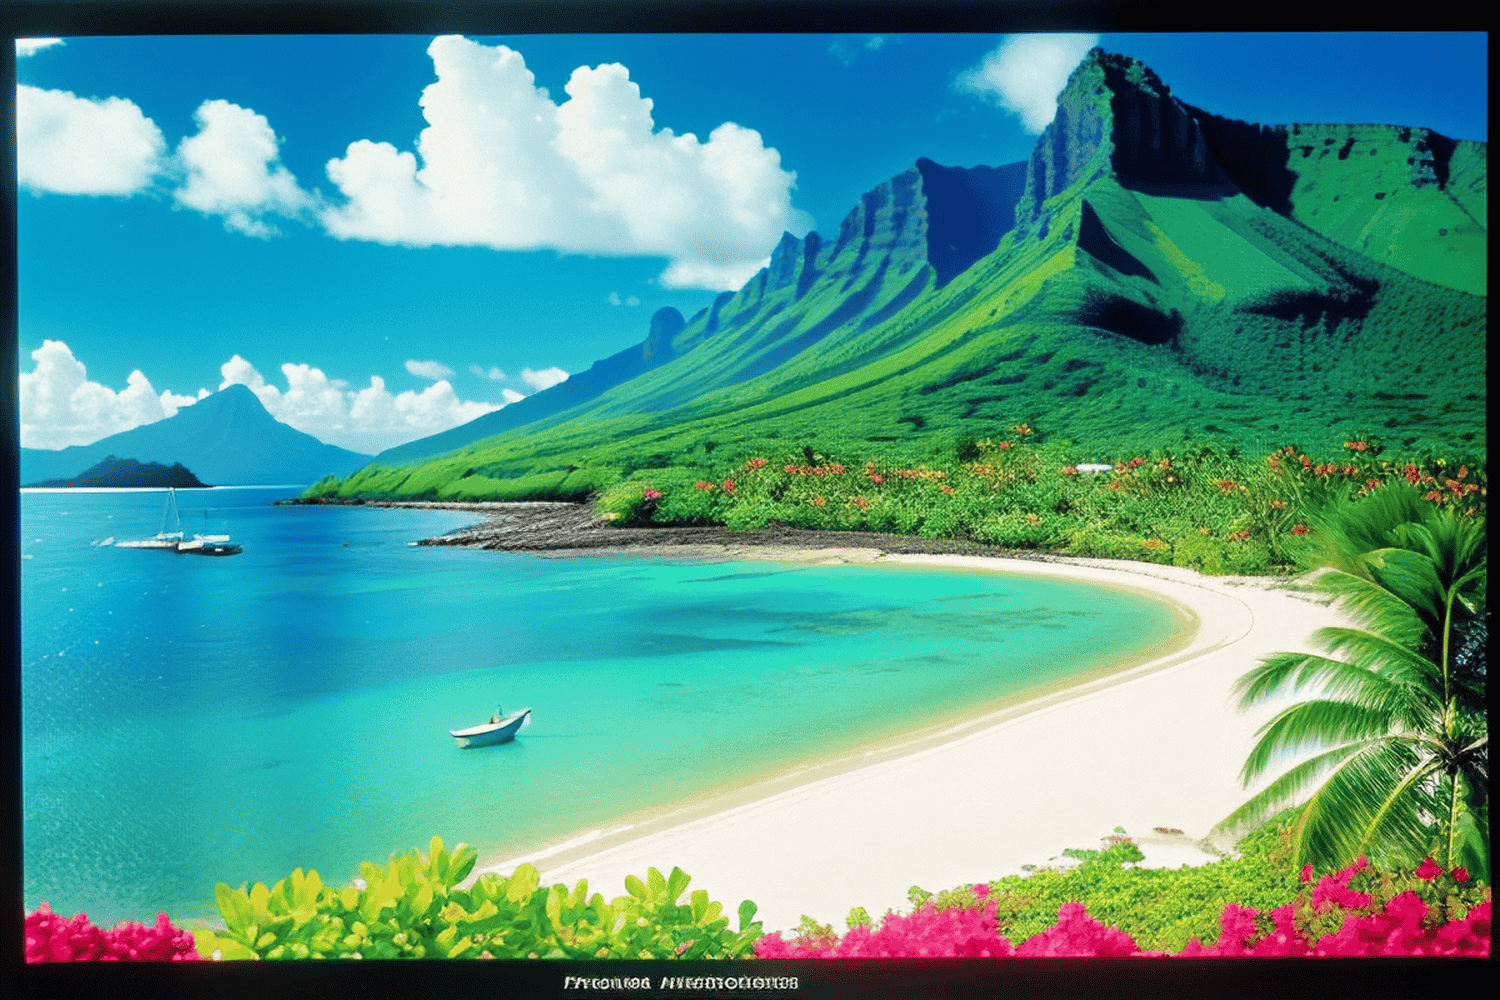 Information about Mauritius